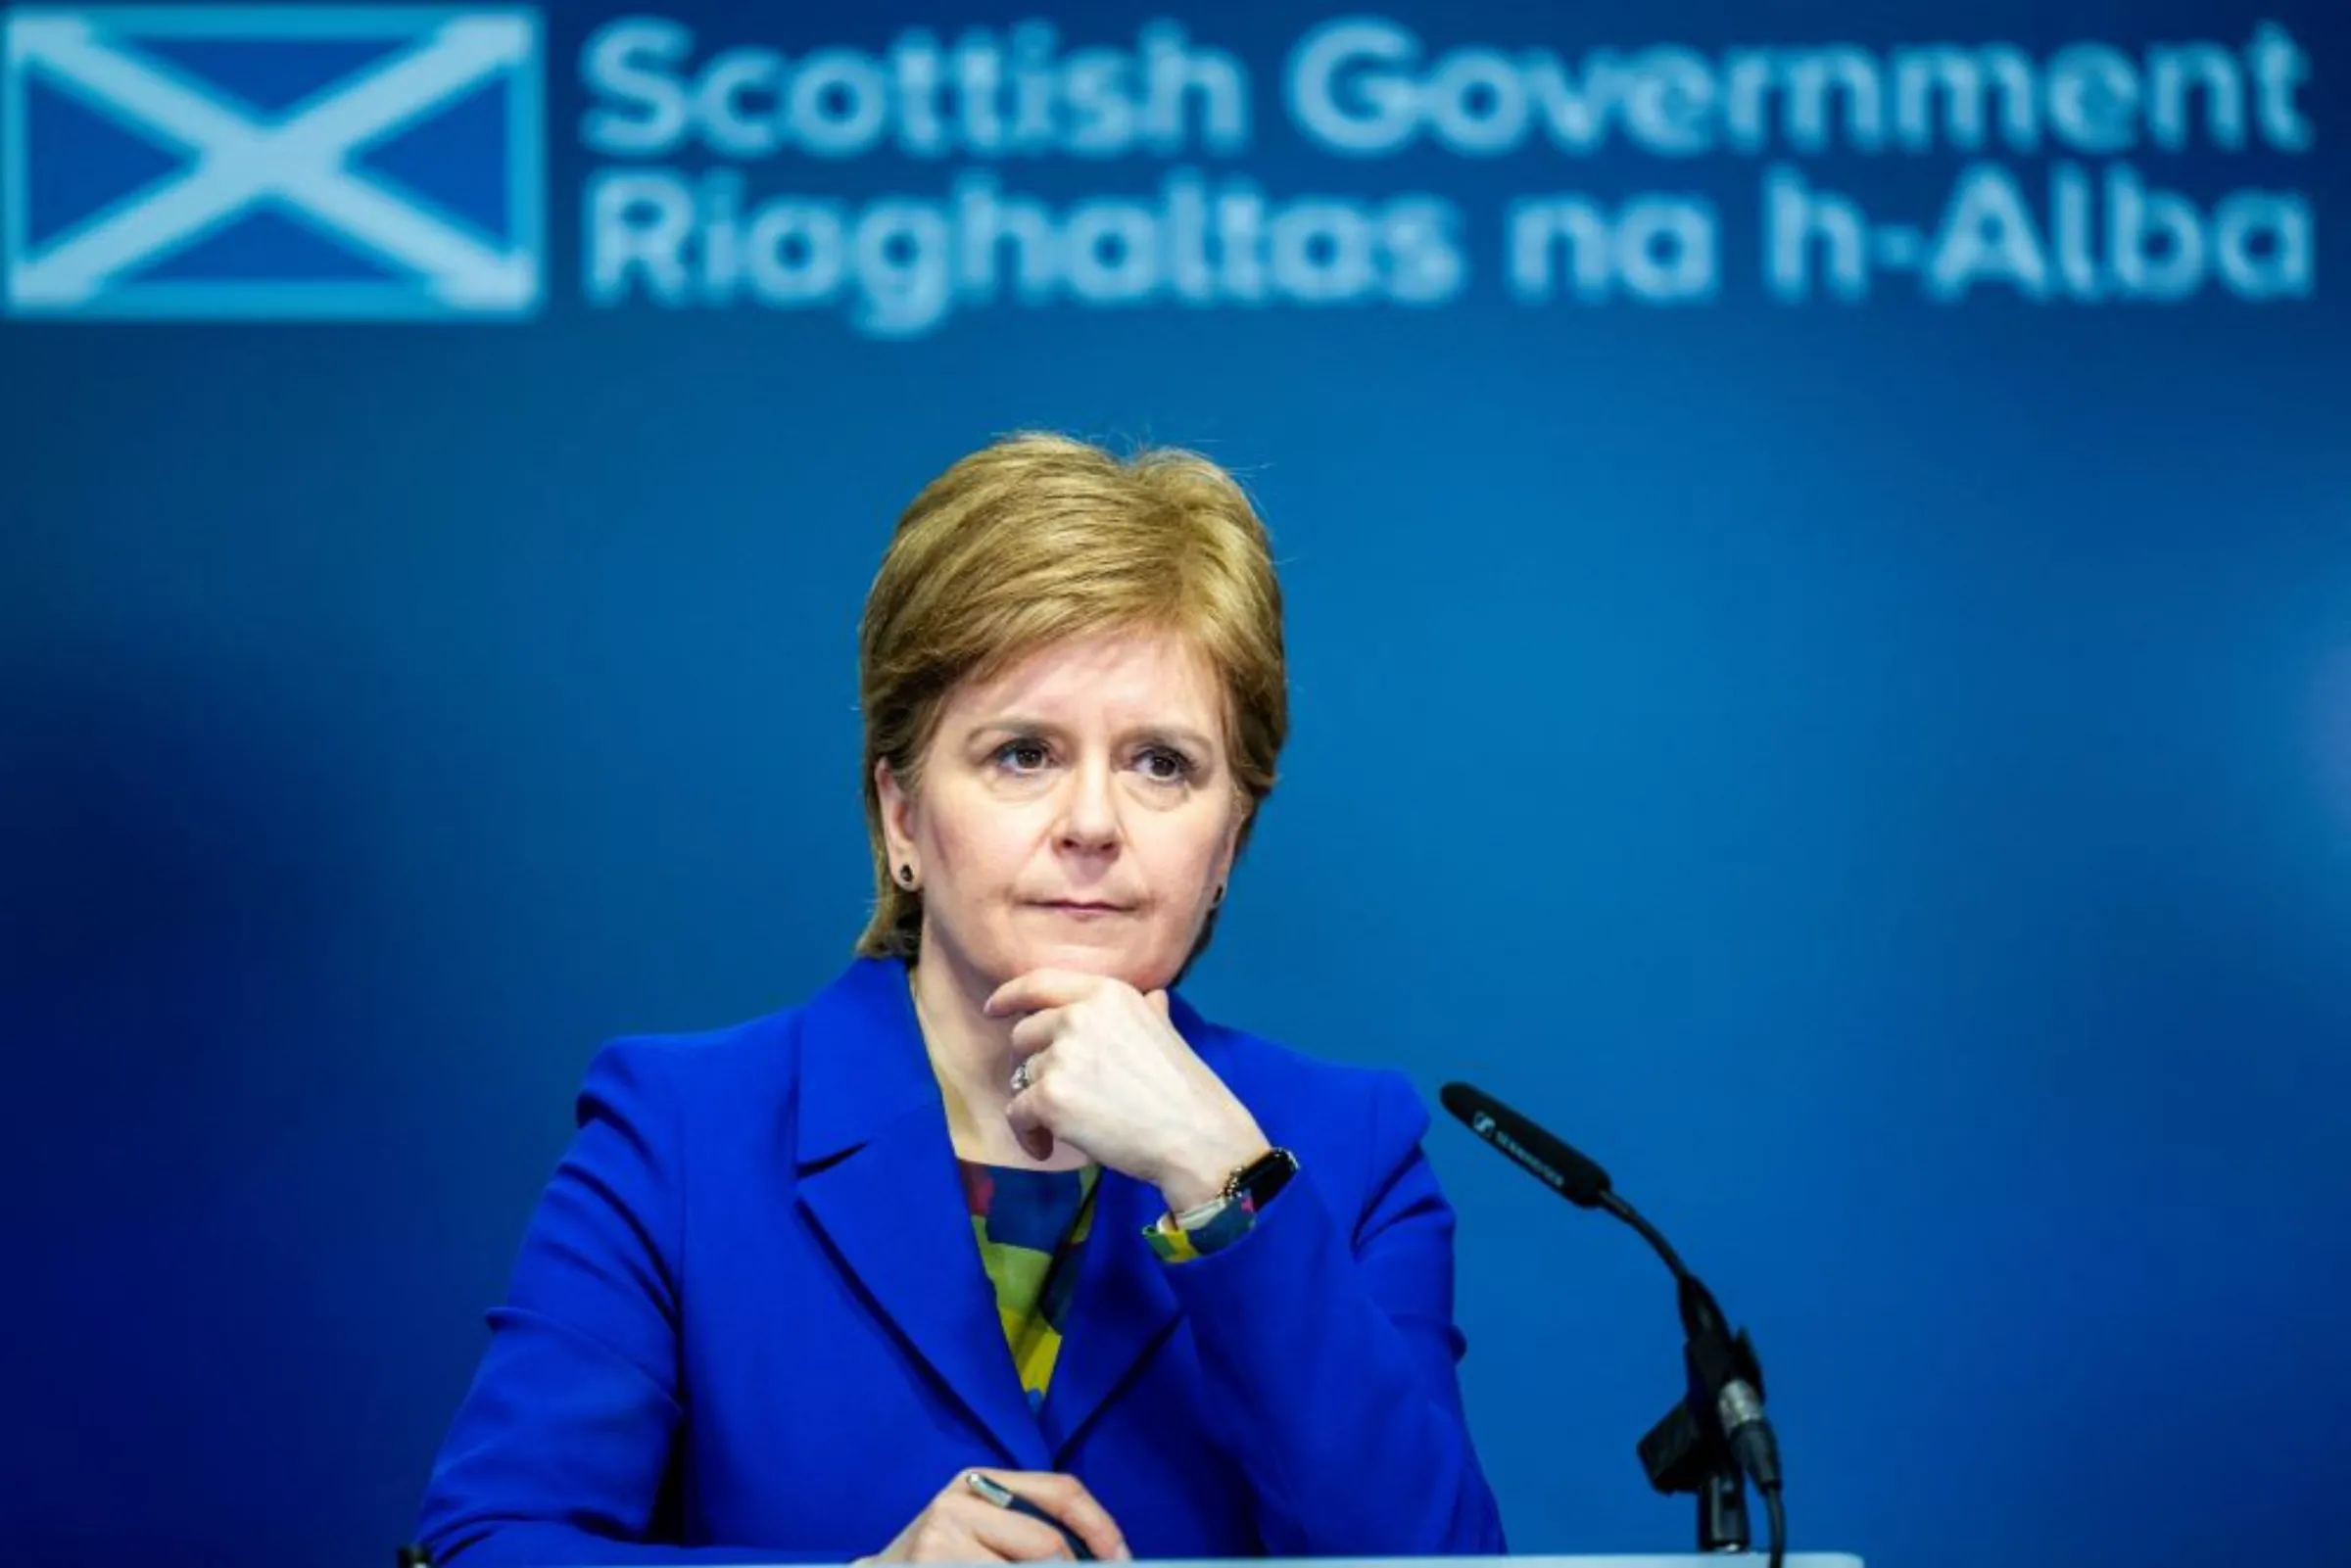 First Minister of Scotland Nicola Sturgeon reacts as she answers questions on Scottish Government issues, during a news conference at St Andrews House, in Edinburgh, Britain February 6, 2023